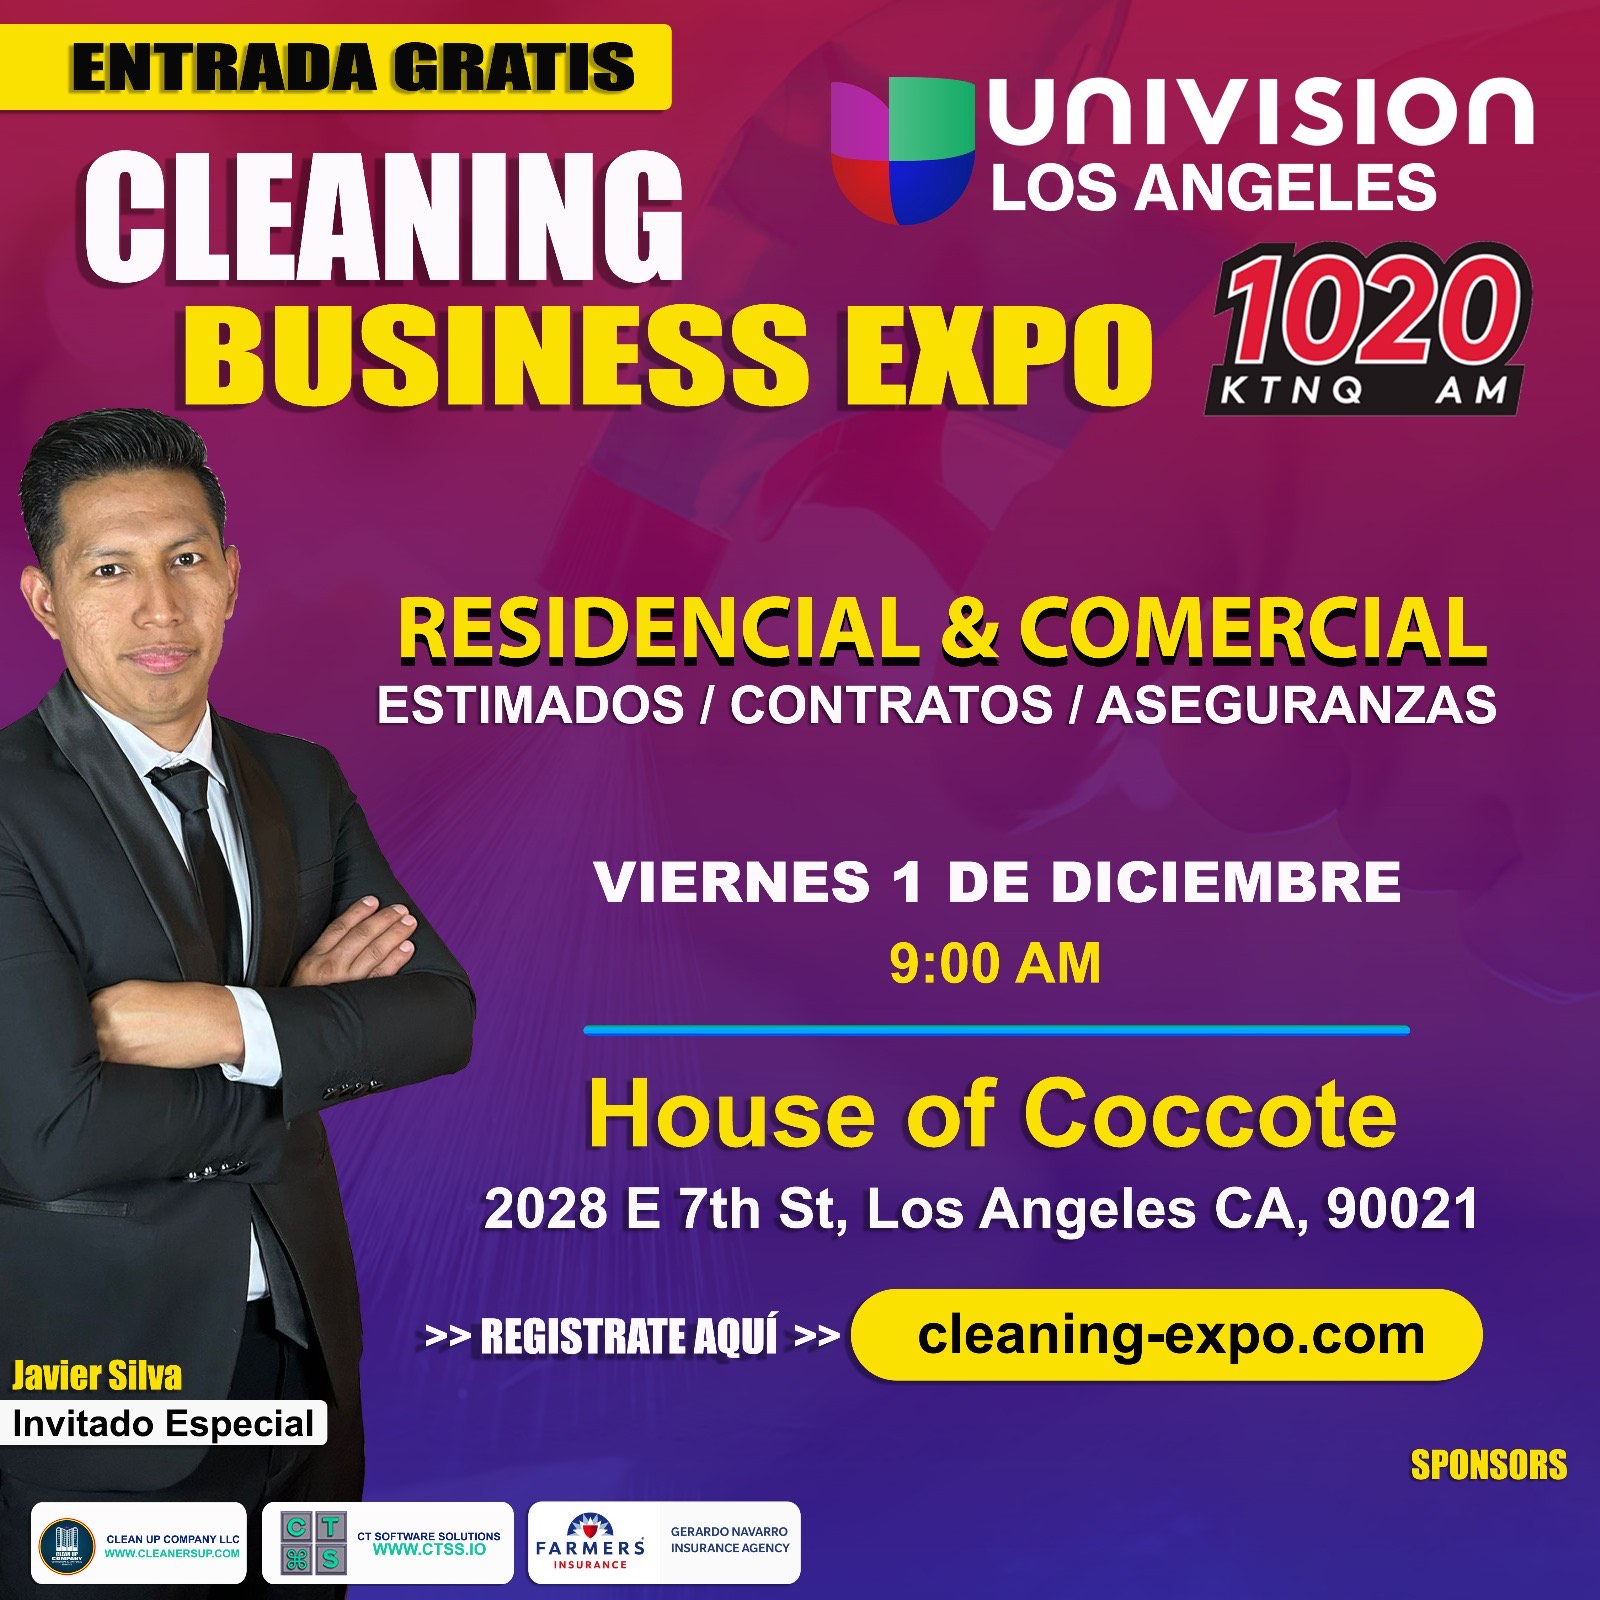 Clean Up Crew Cleaning Business Expo on December 1